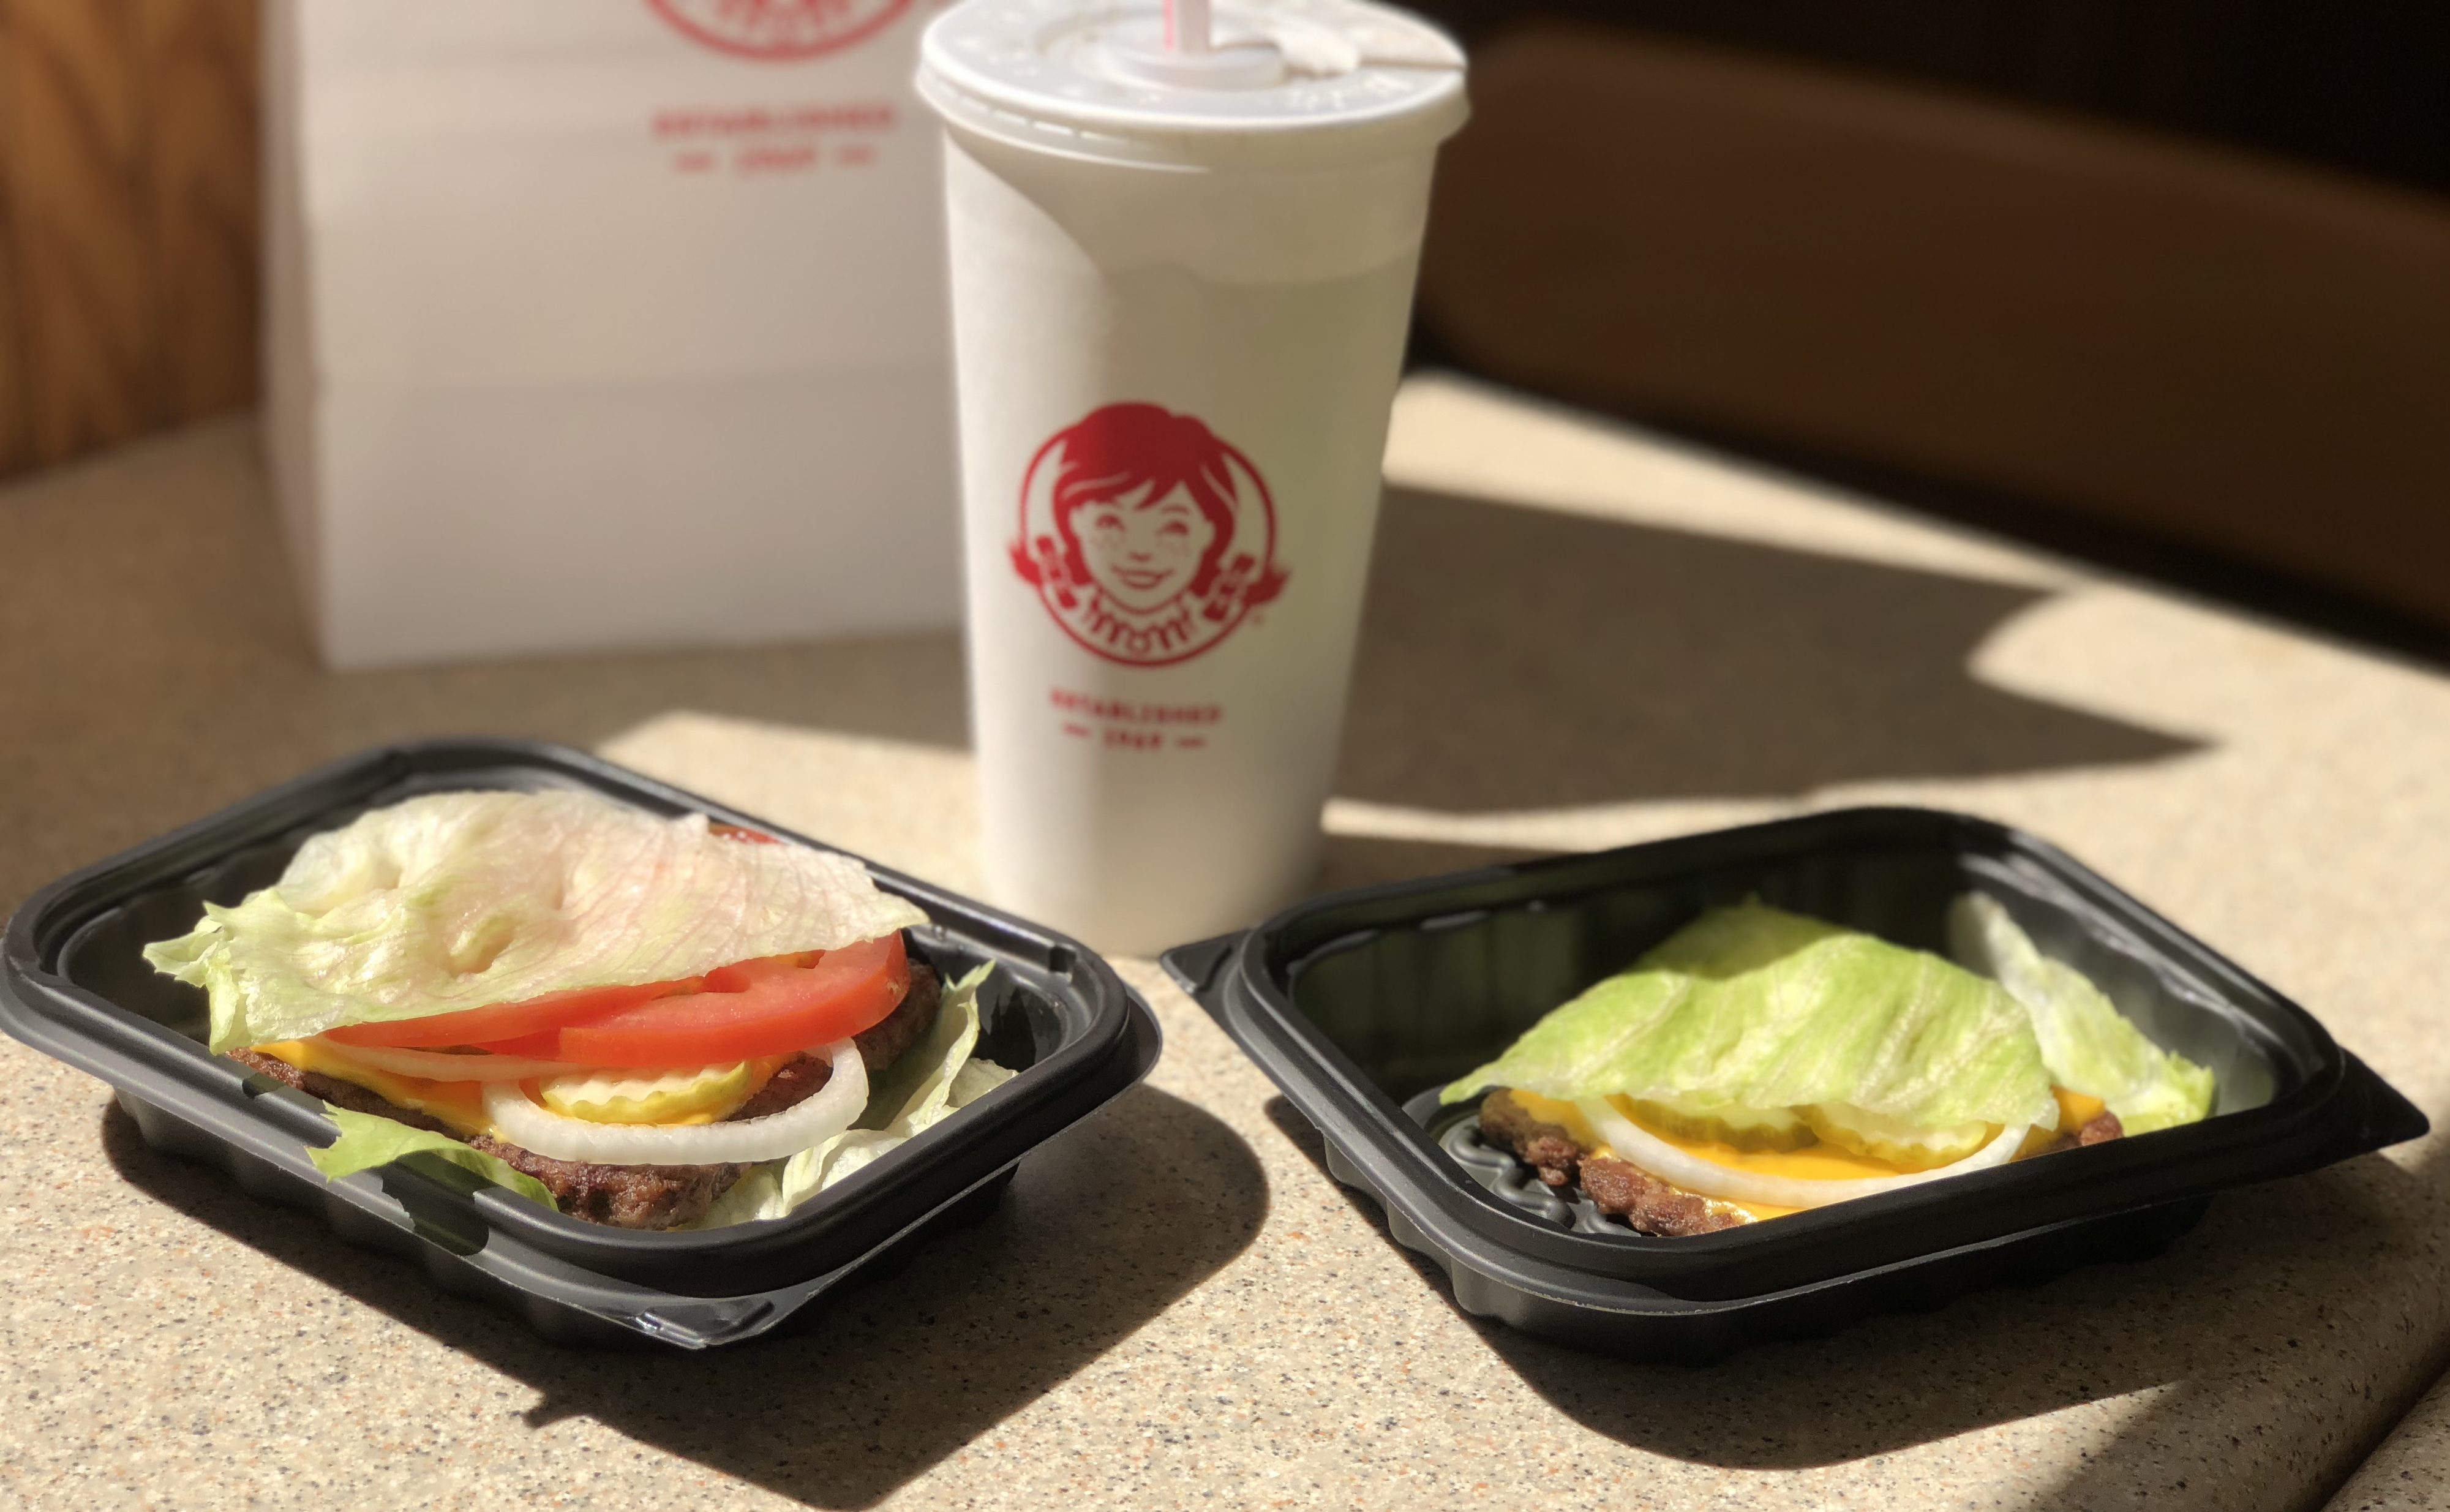 Wendy's Keto burgers like the ones in September you can get with this deal